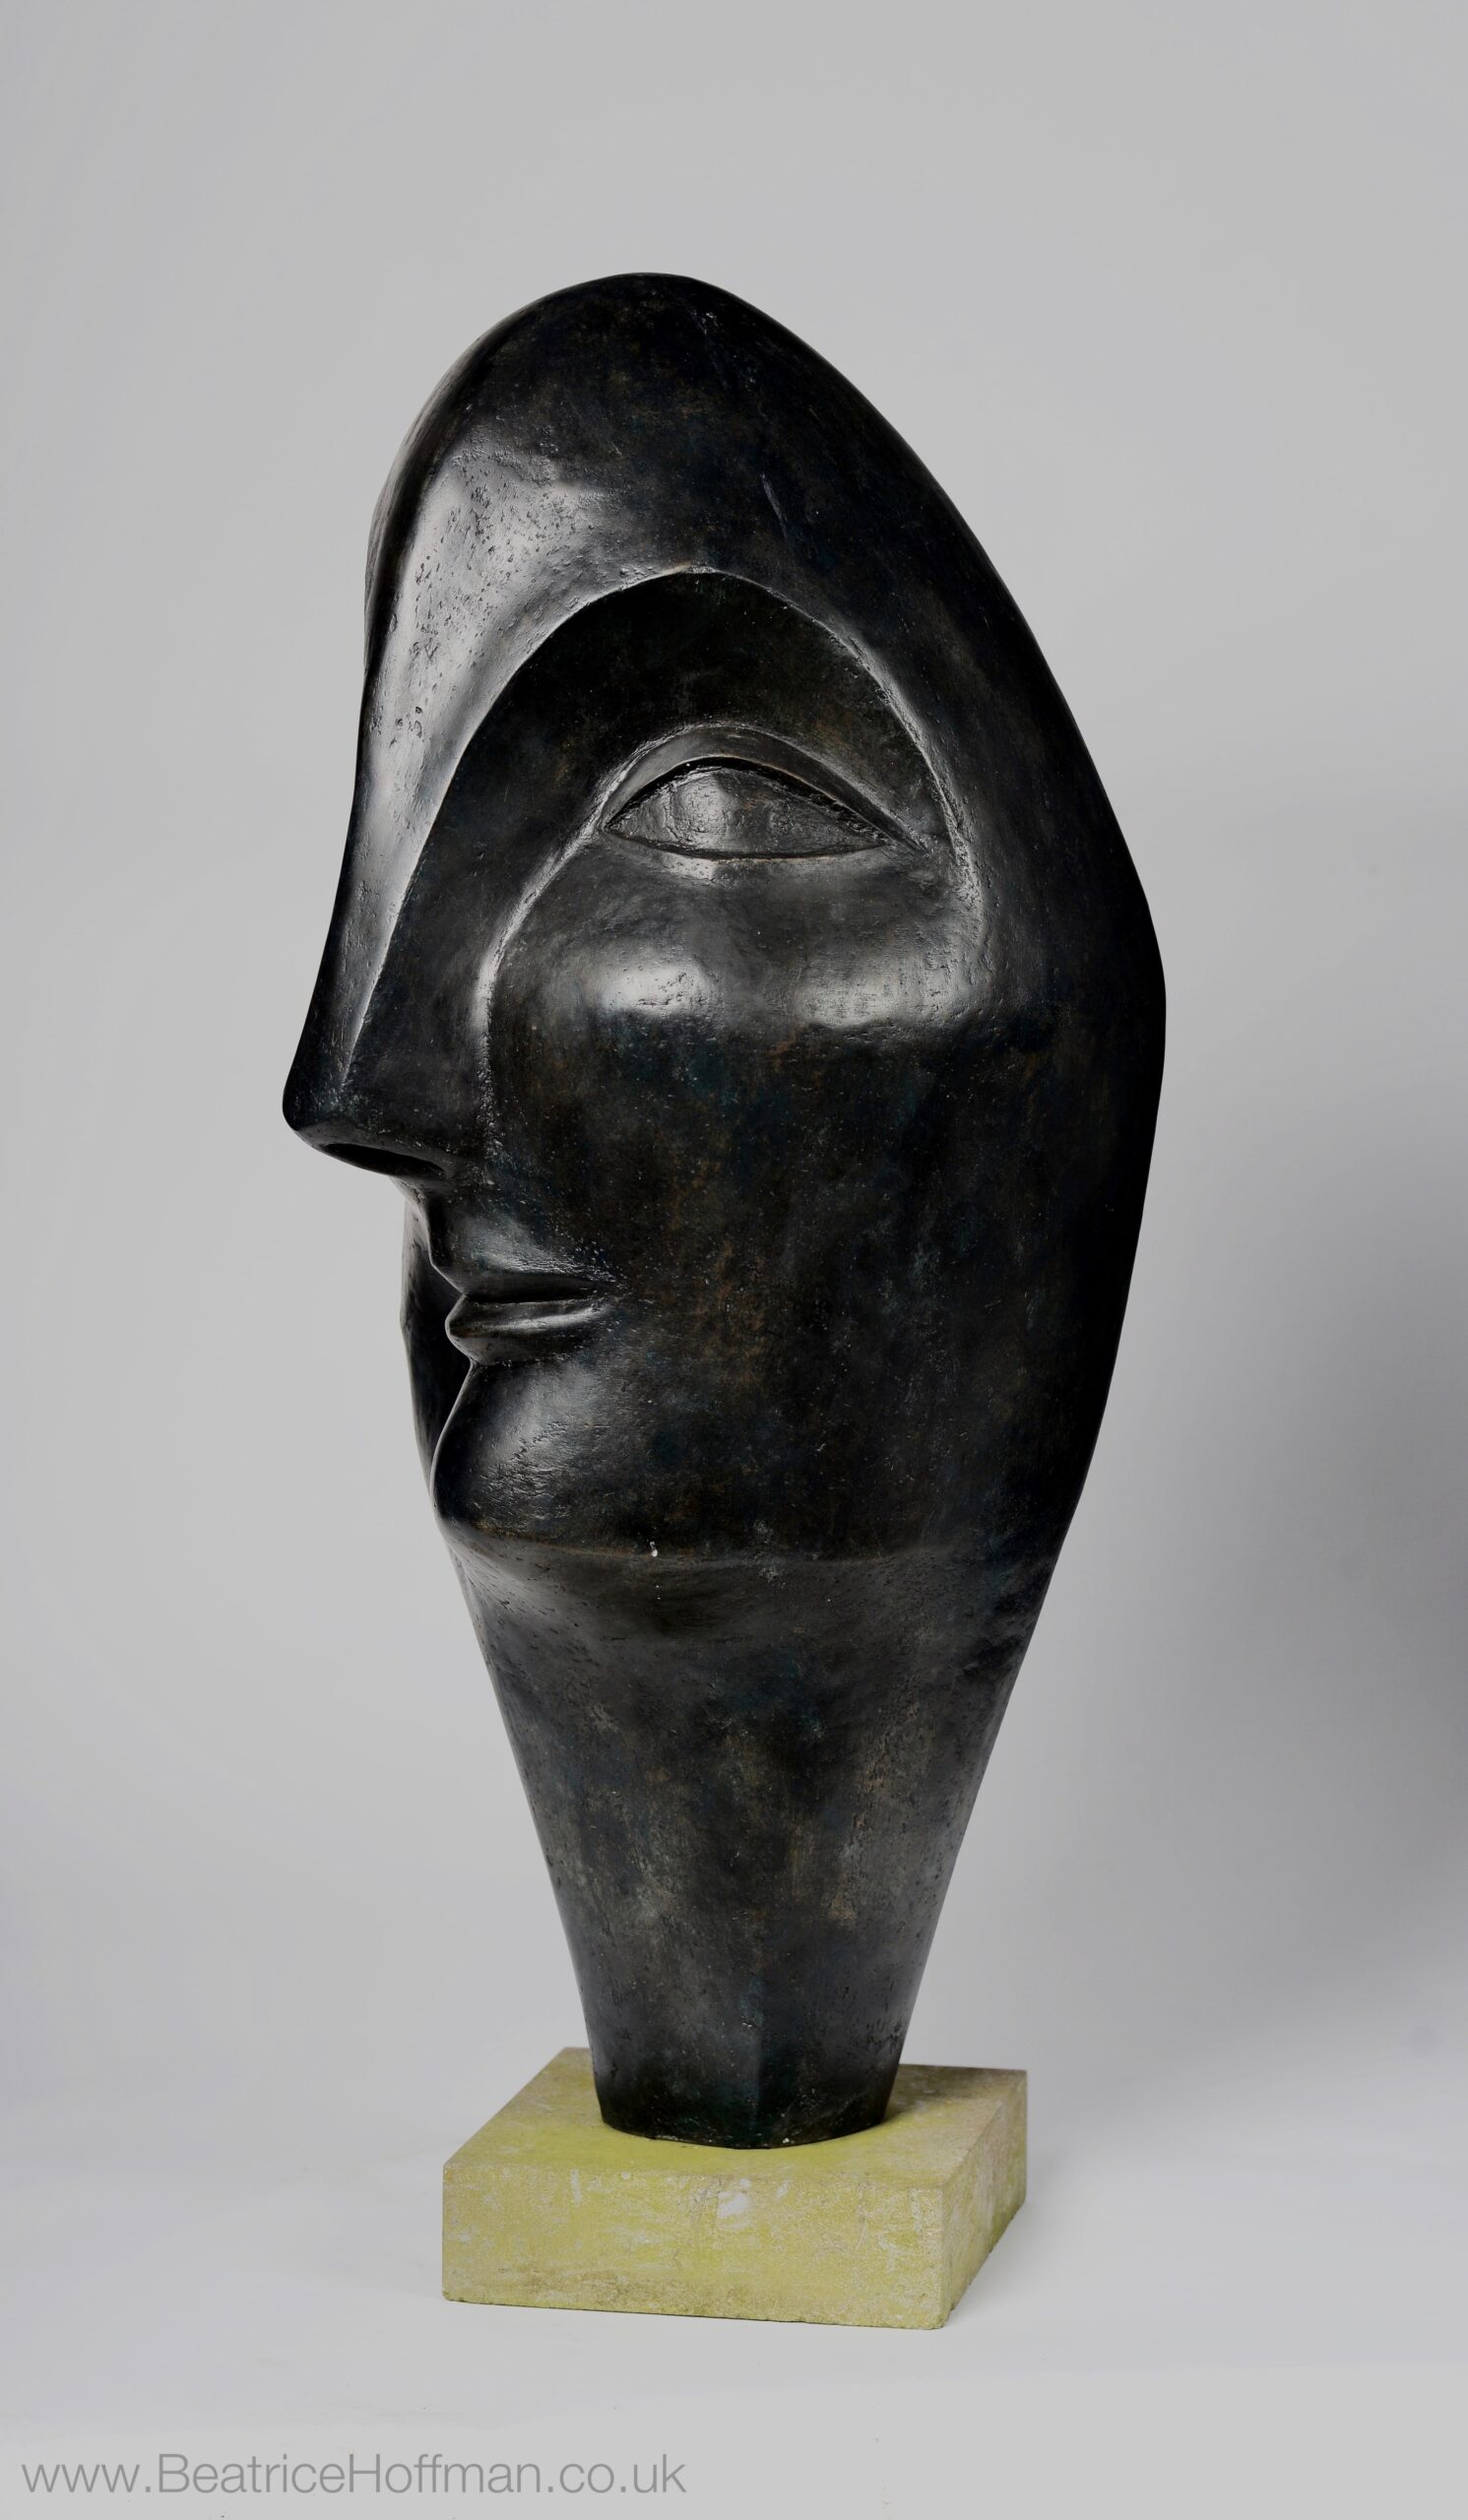 large contemporary garden bronze sculpture of a head based on Picasso